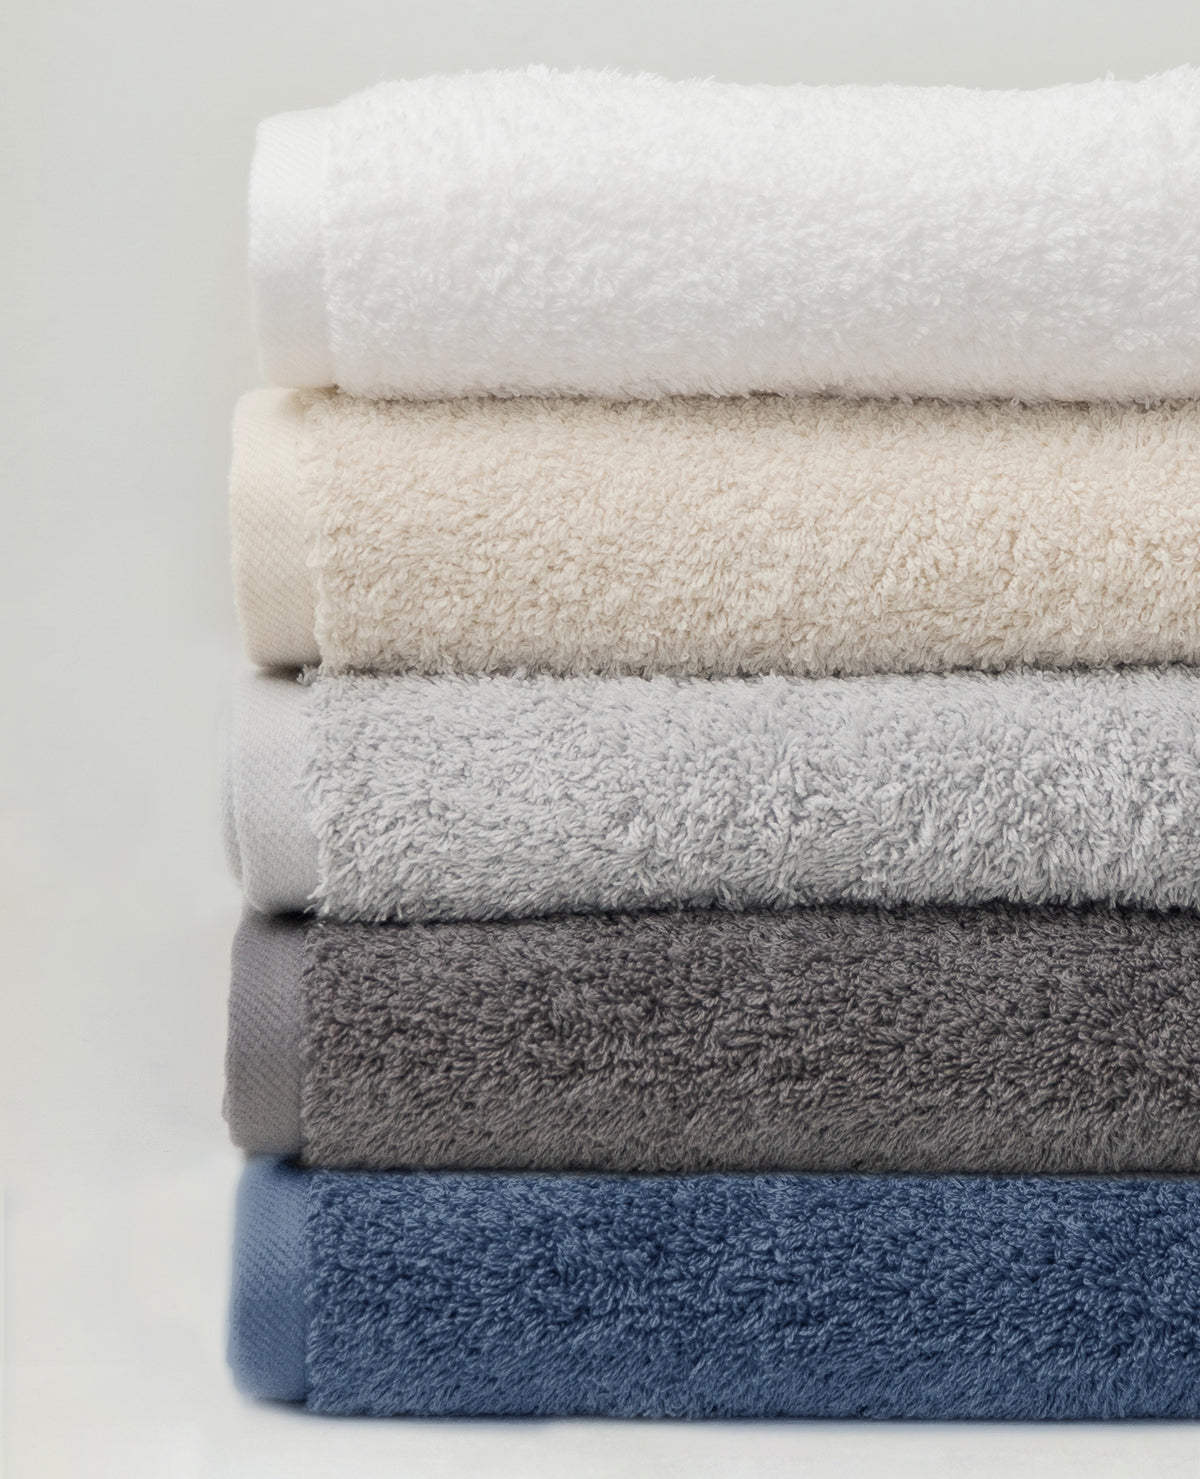 How to Wash & Whiten Your Towels